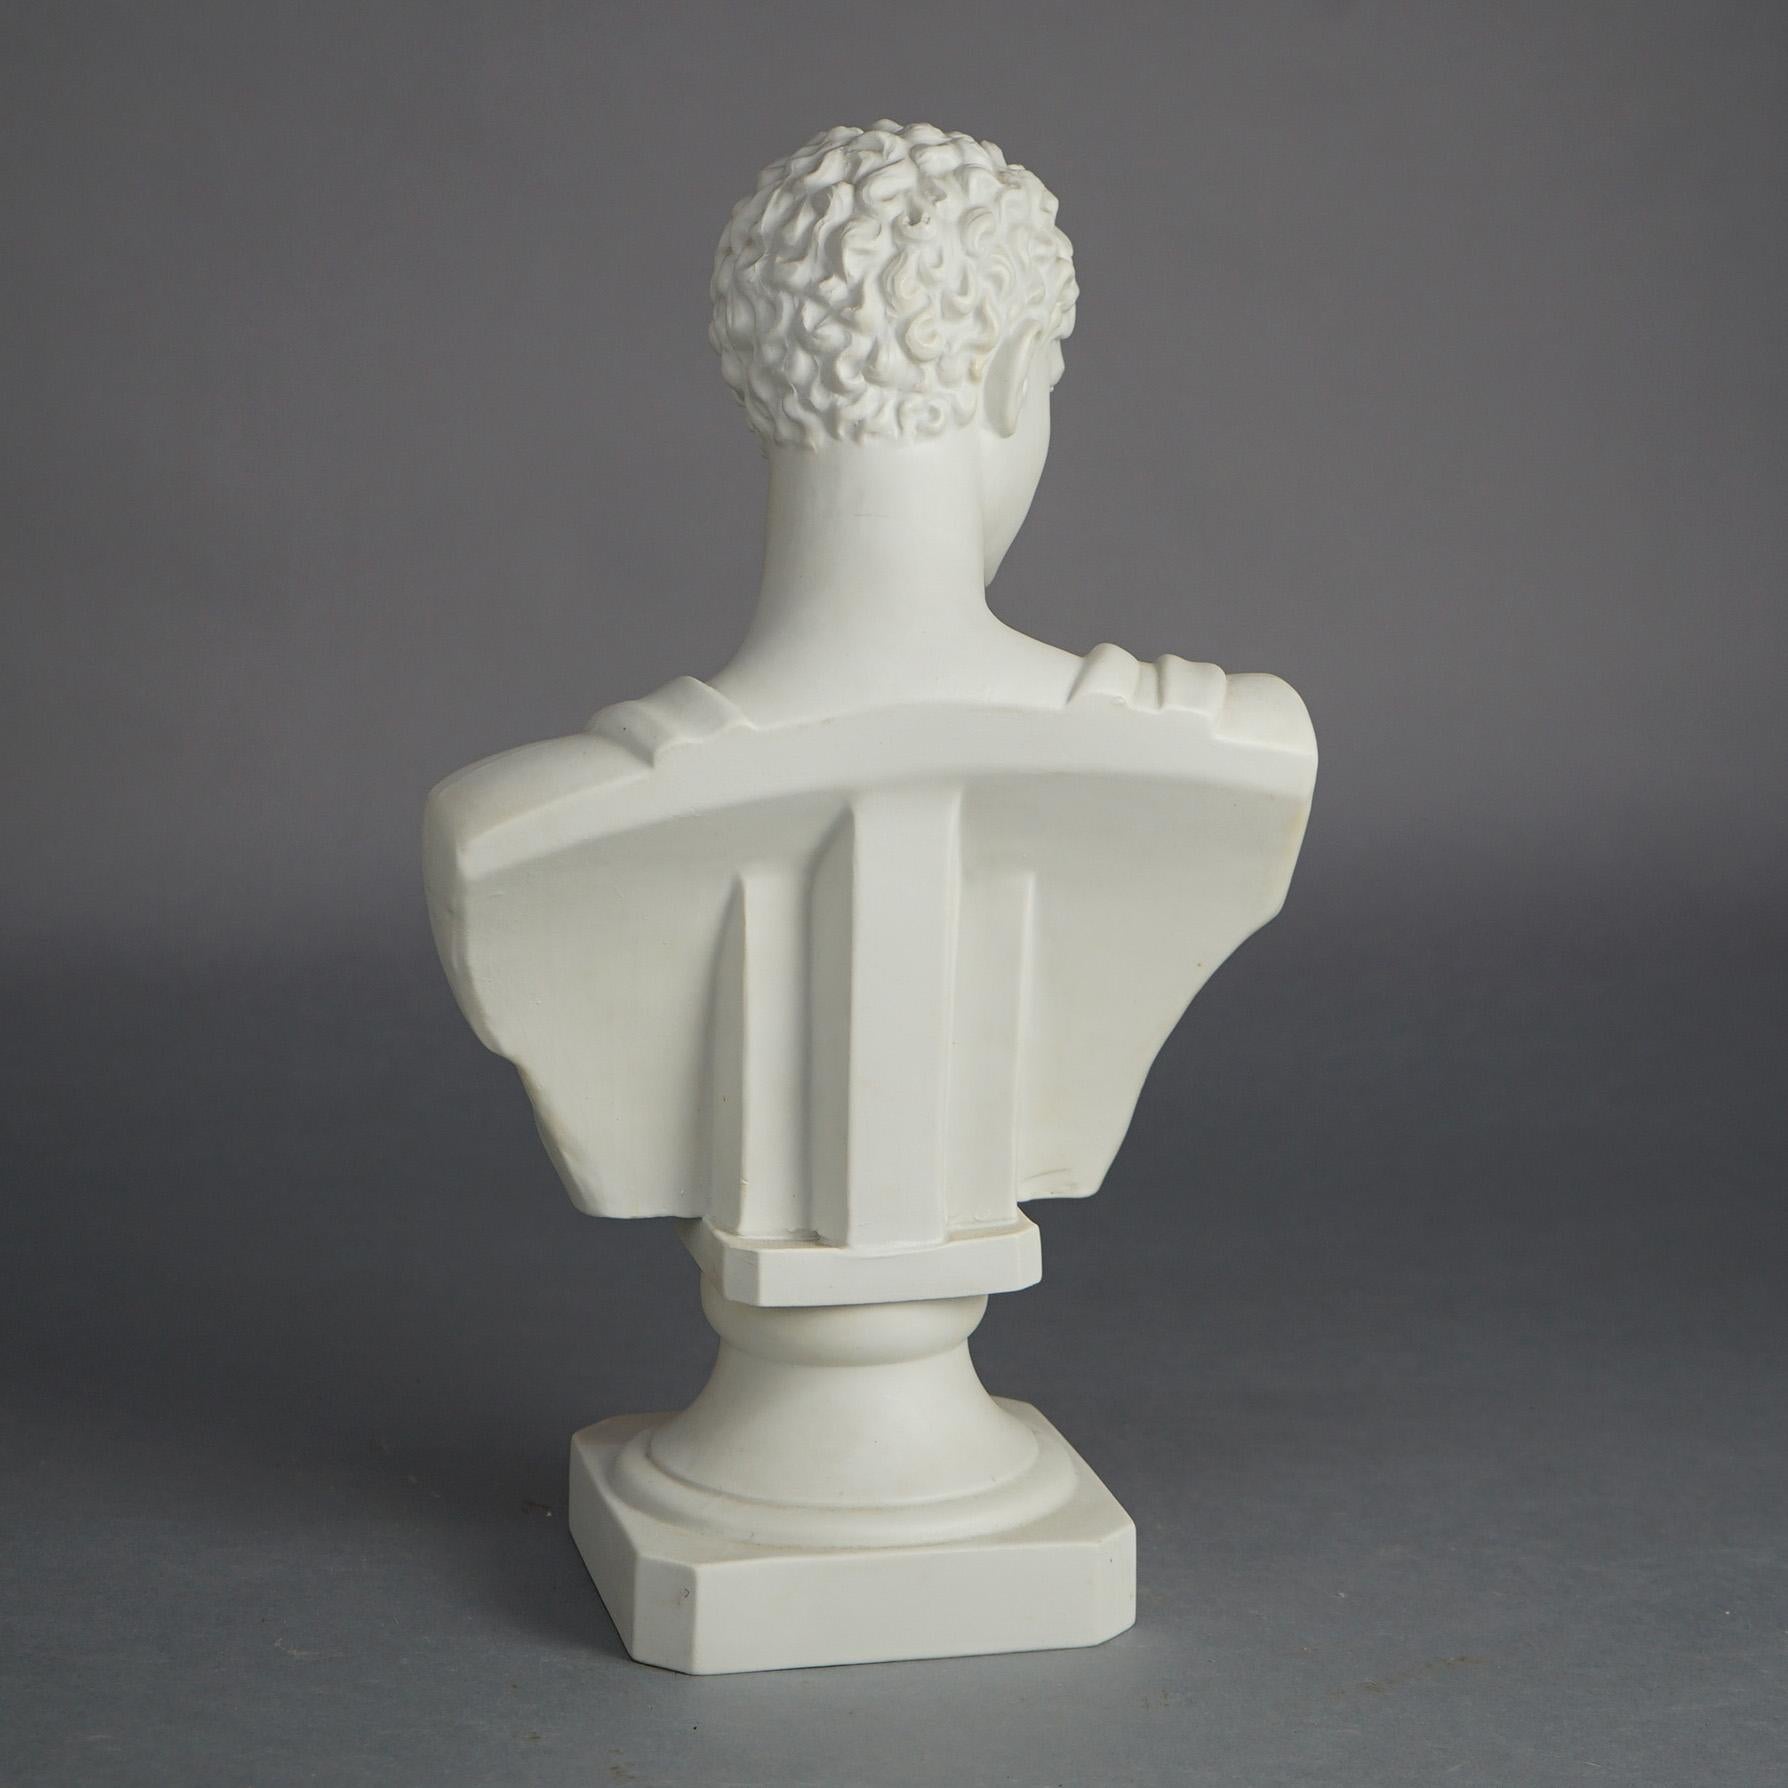 Antique French Neoclassical Parian Porcelain Bust of Michaelangelo's David C1900 For Sale 2